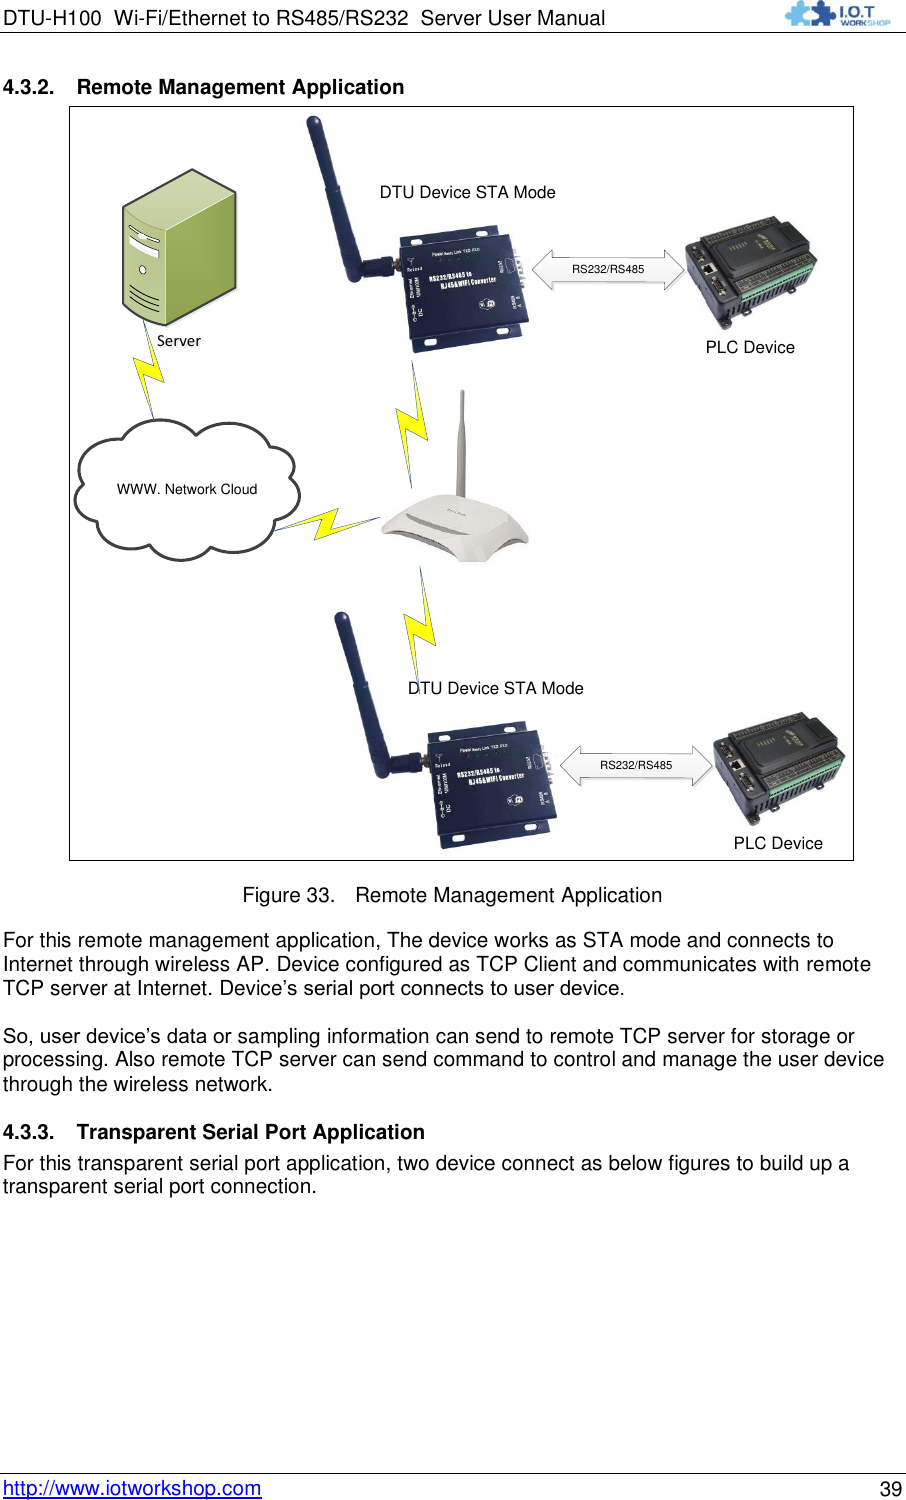 DTU-H100 Wi-Fi/Ethernet to RS485/RS232  Server User Manual    http://www.iotworkshop.com 39 4.3.2. Remote Management Application PLC DeviceRS232/RS485DTU Device STA ModeServerServerWWW. Network CloudPLC DeviceRS232/RS485DTU Device STA Mode Figure 33. Remote Management Application For this remote management application, The device works as STA mode and connects to Internet through wireless AP. Device configured as TCP Client and communicates with remote TCP server at Internet. Device‟s serial port connects to user device.   So, user device‟s data or sampling information can send to remote TCP server for storage or processing. Also remote TCP server can send command to control and manage the user device through the wireless network. 4.3.3. Transparent Serial Port Application For this transparent serial port application, two device connect as below figures to build up a transparent serial port connection.  